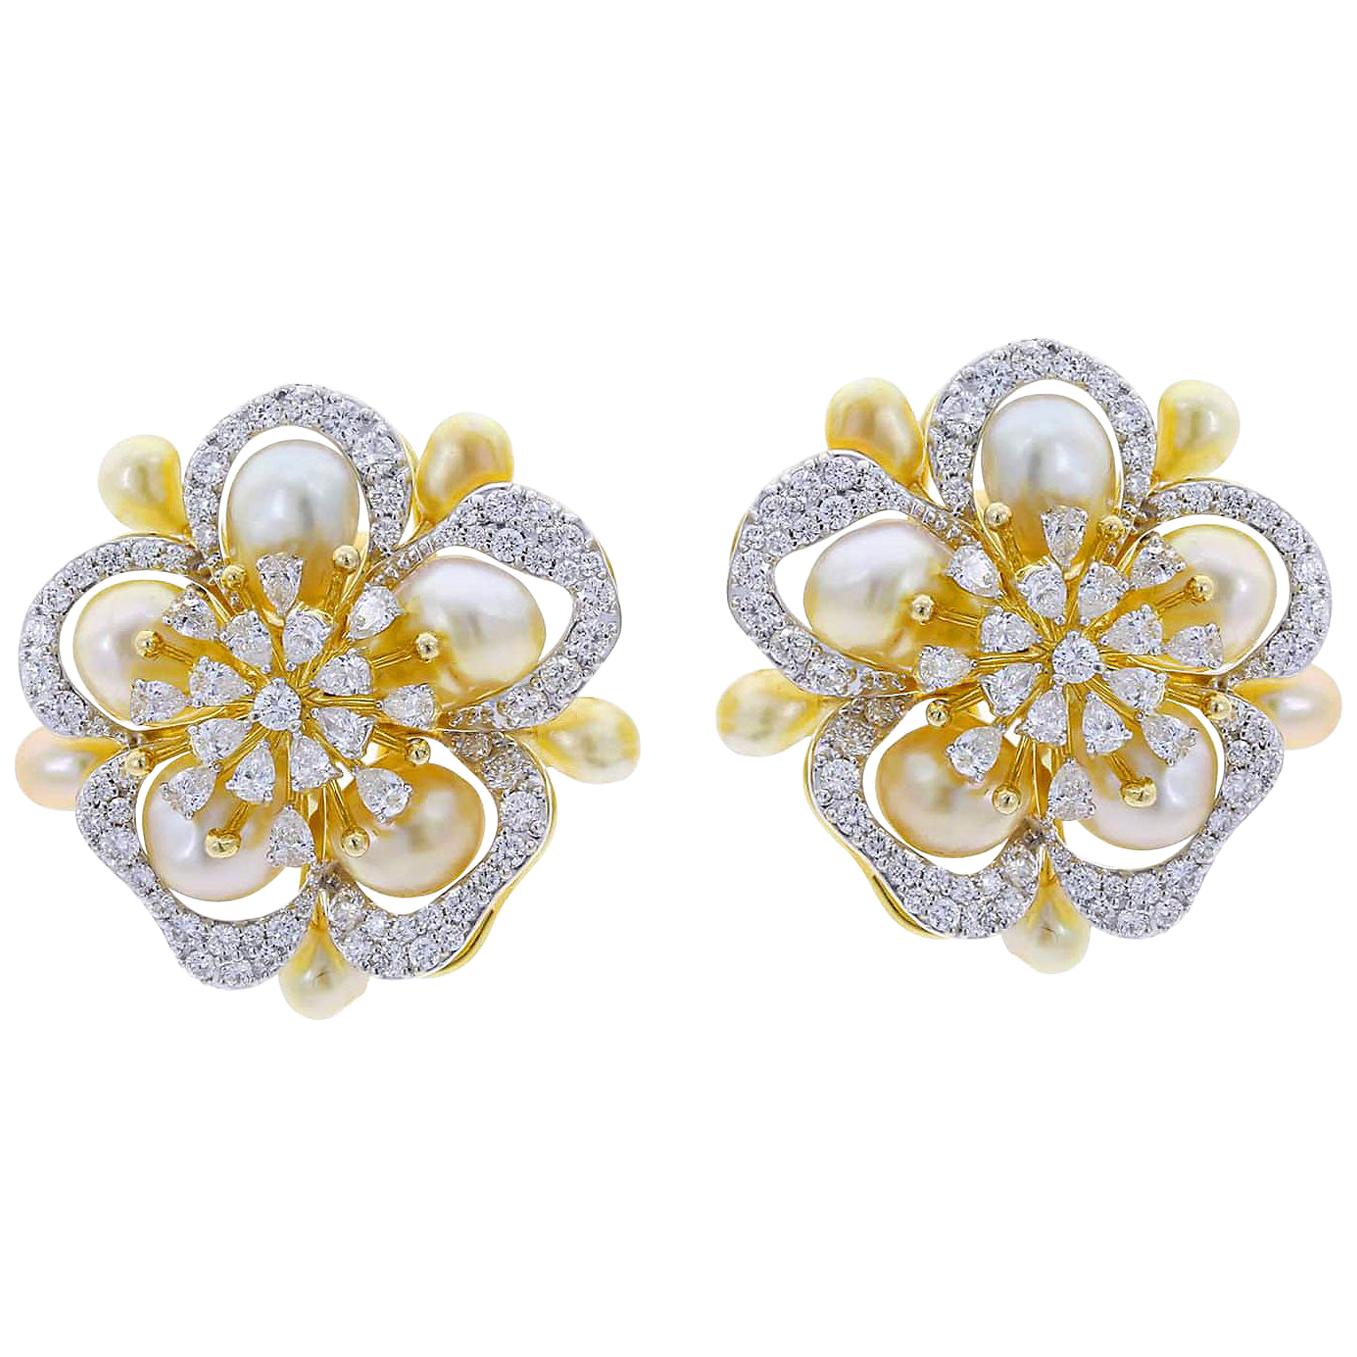 Fine Floral Pearl and Diamond Earrings, 18 Karat Yellow Gold by D'Deco